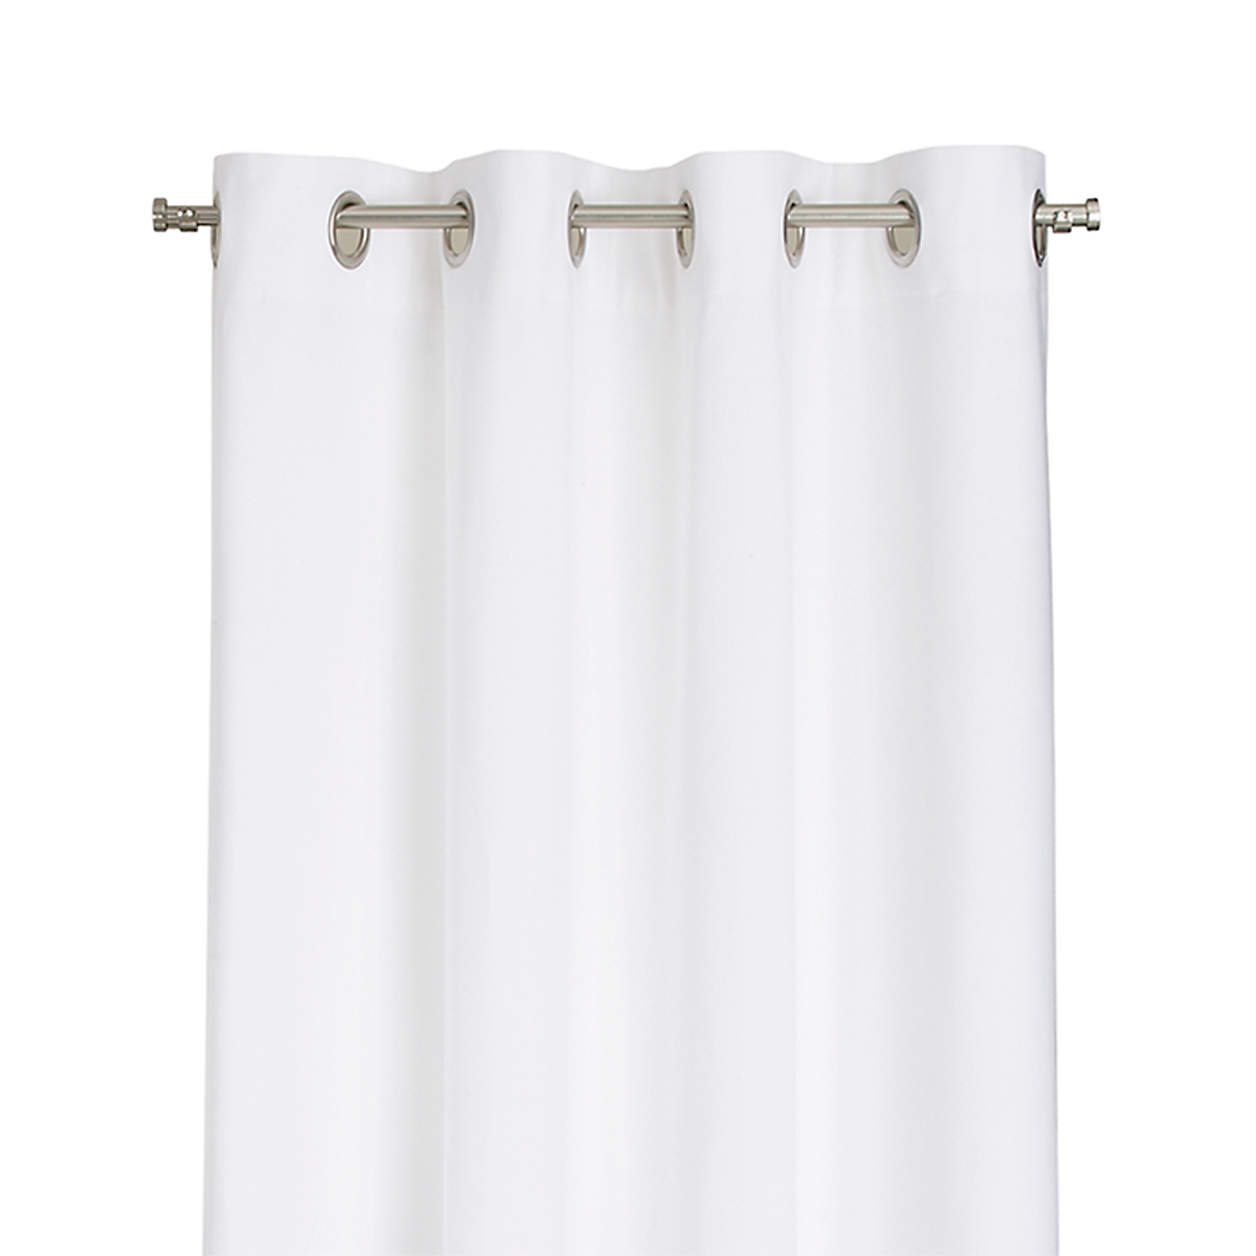 Wallace 52x63 White Grommet Curtain Panel Reviews Crate And Barrel 7245